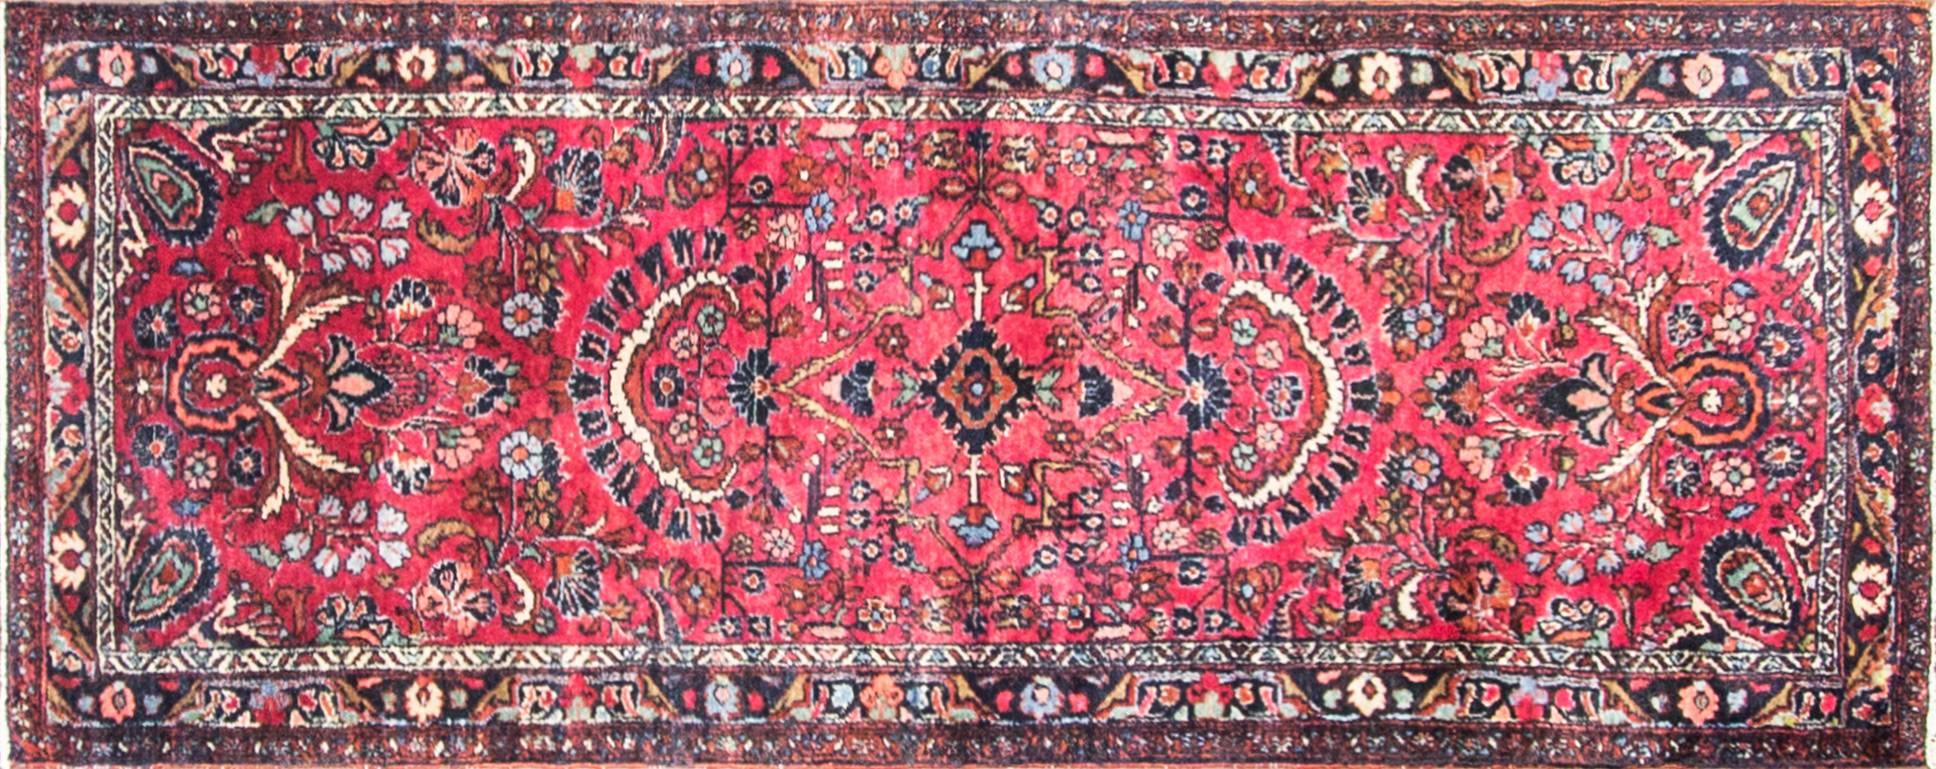 From Sultanabad region of Persia, circa 1920.
 Lilihan is one of a group of Armenian villages which makes the rugs known as Lilihan. Measures: 2'9" x 7'1".